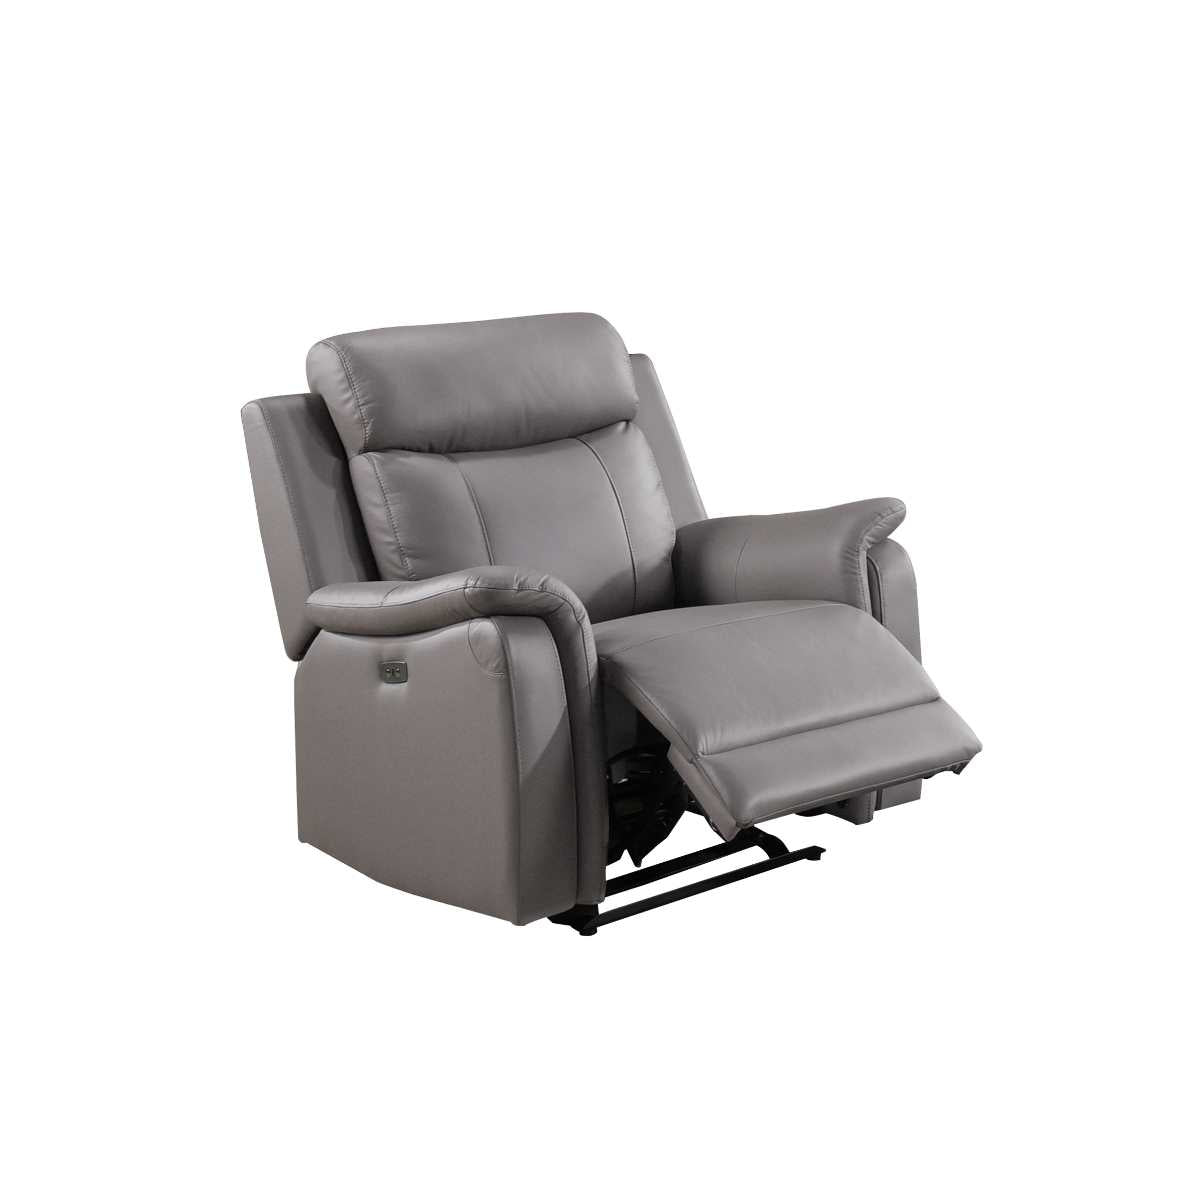 Cyrus Top Grain Leather Power Glider Recliner Chair Light Grey 99840